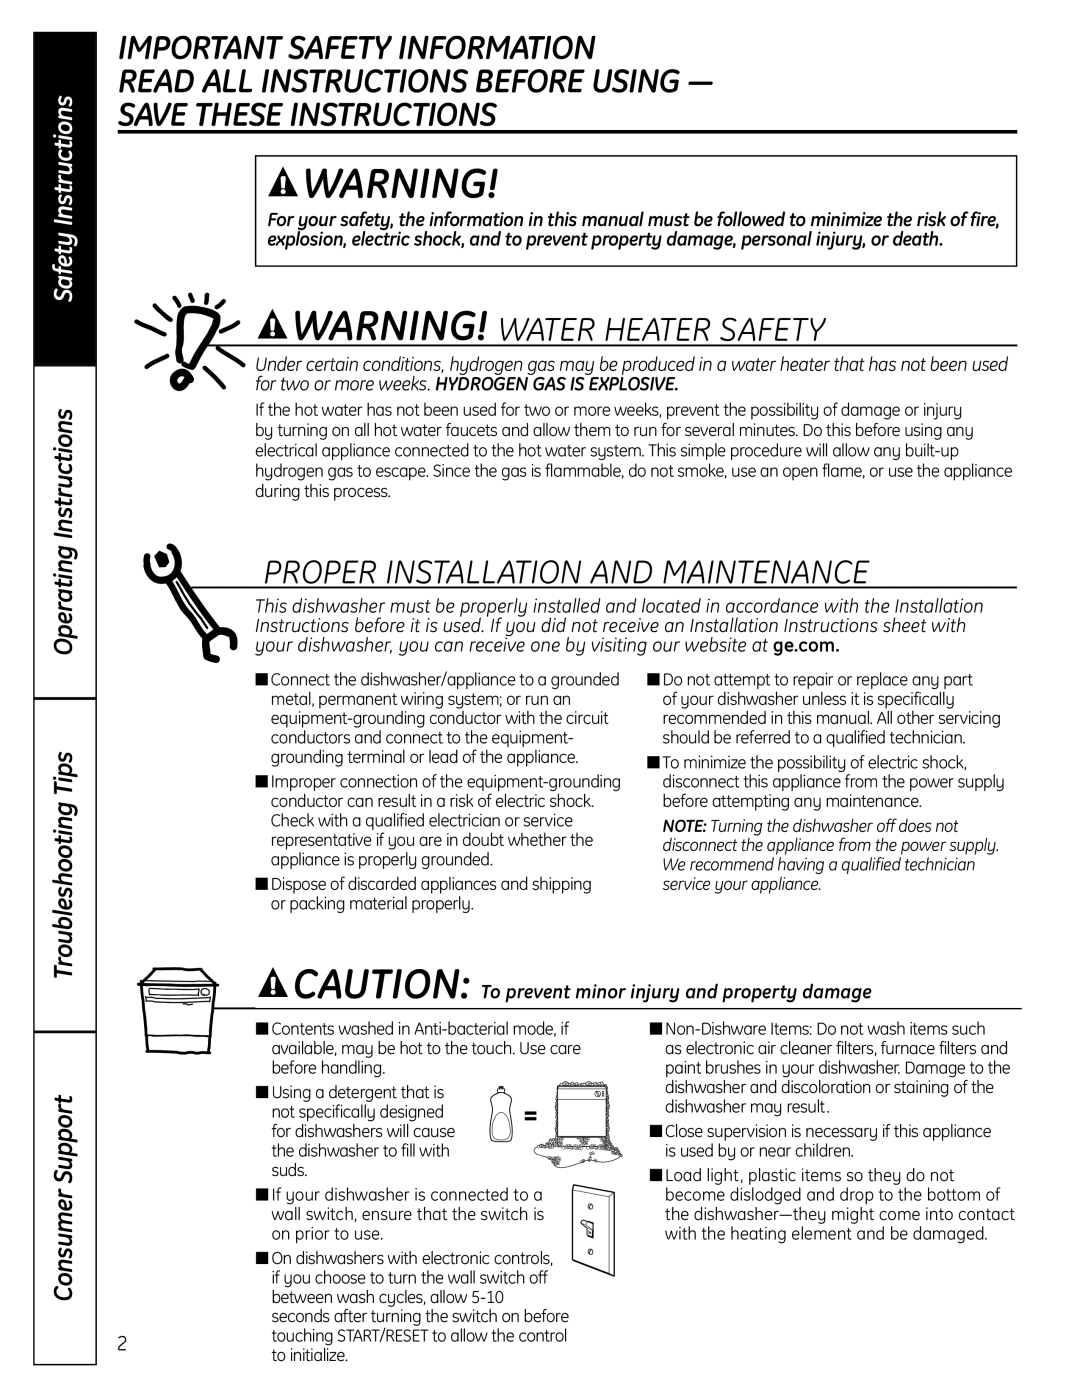 GE GSD3000 Important Safety Information, Read All Instructions Before Using, Save These Instructions, Safety Instructions 